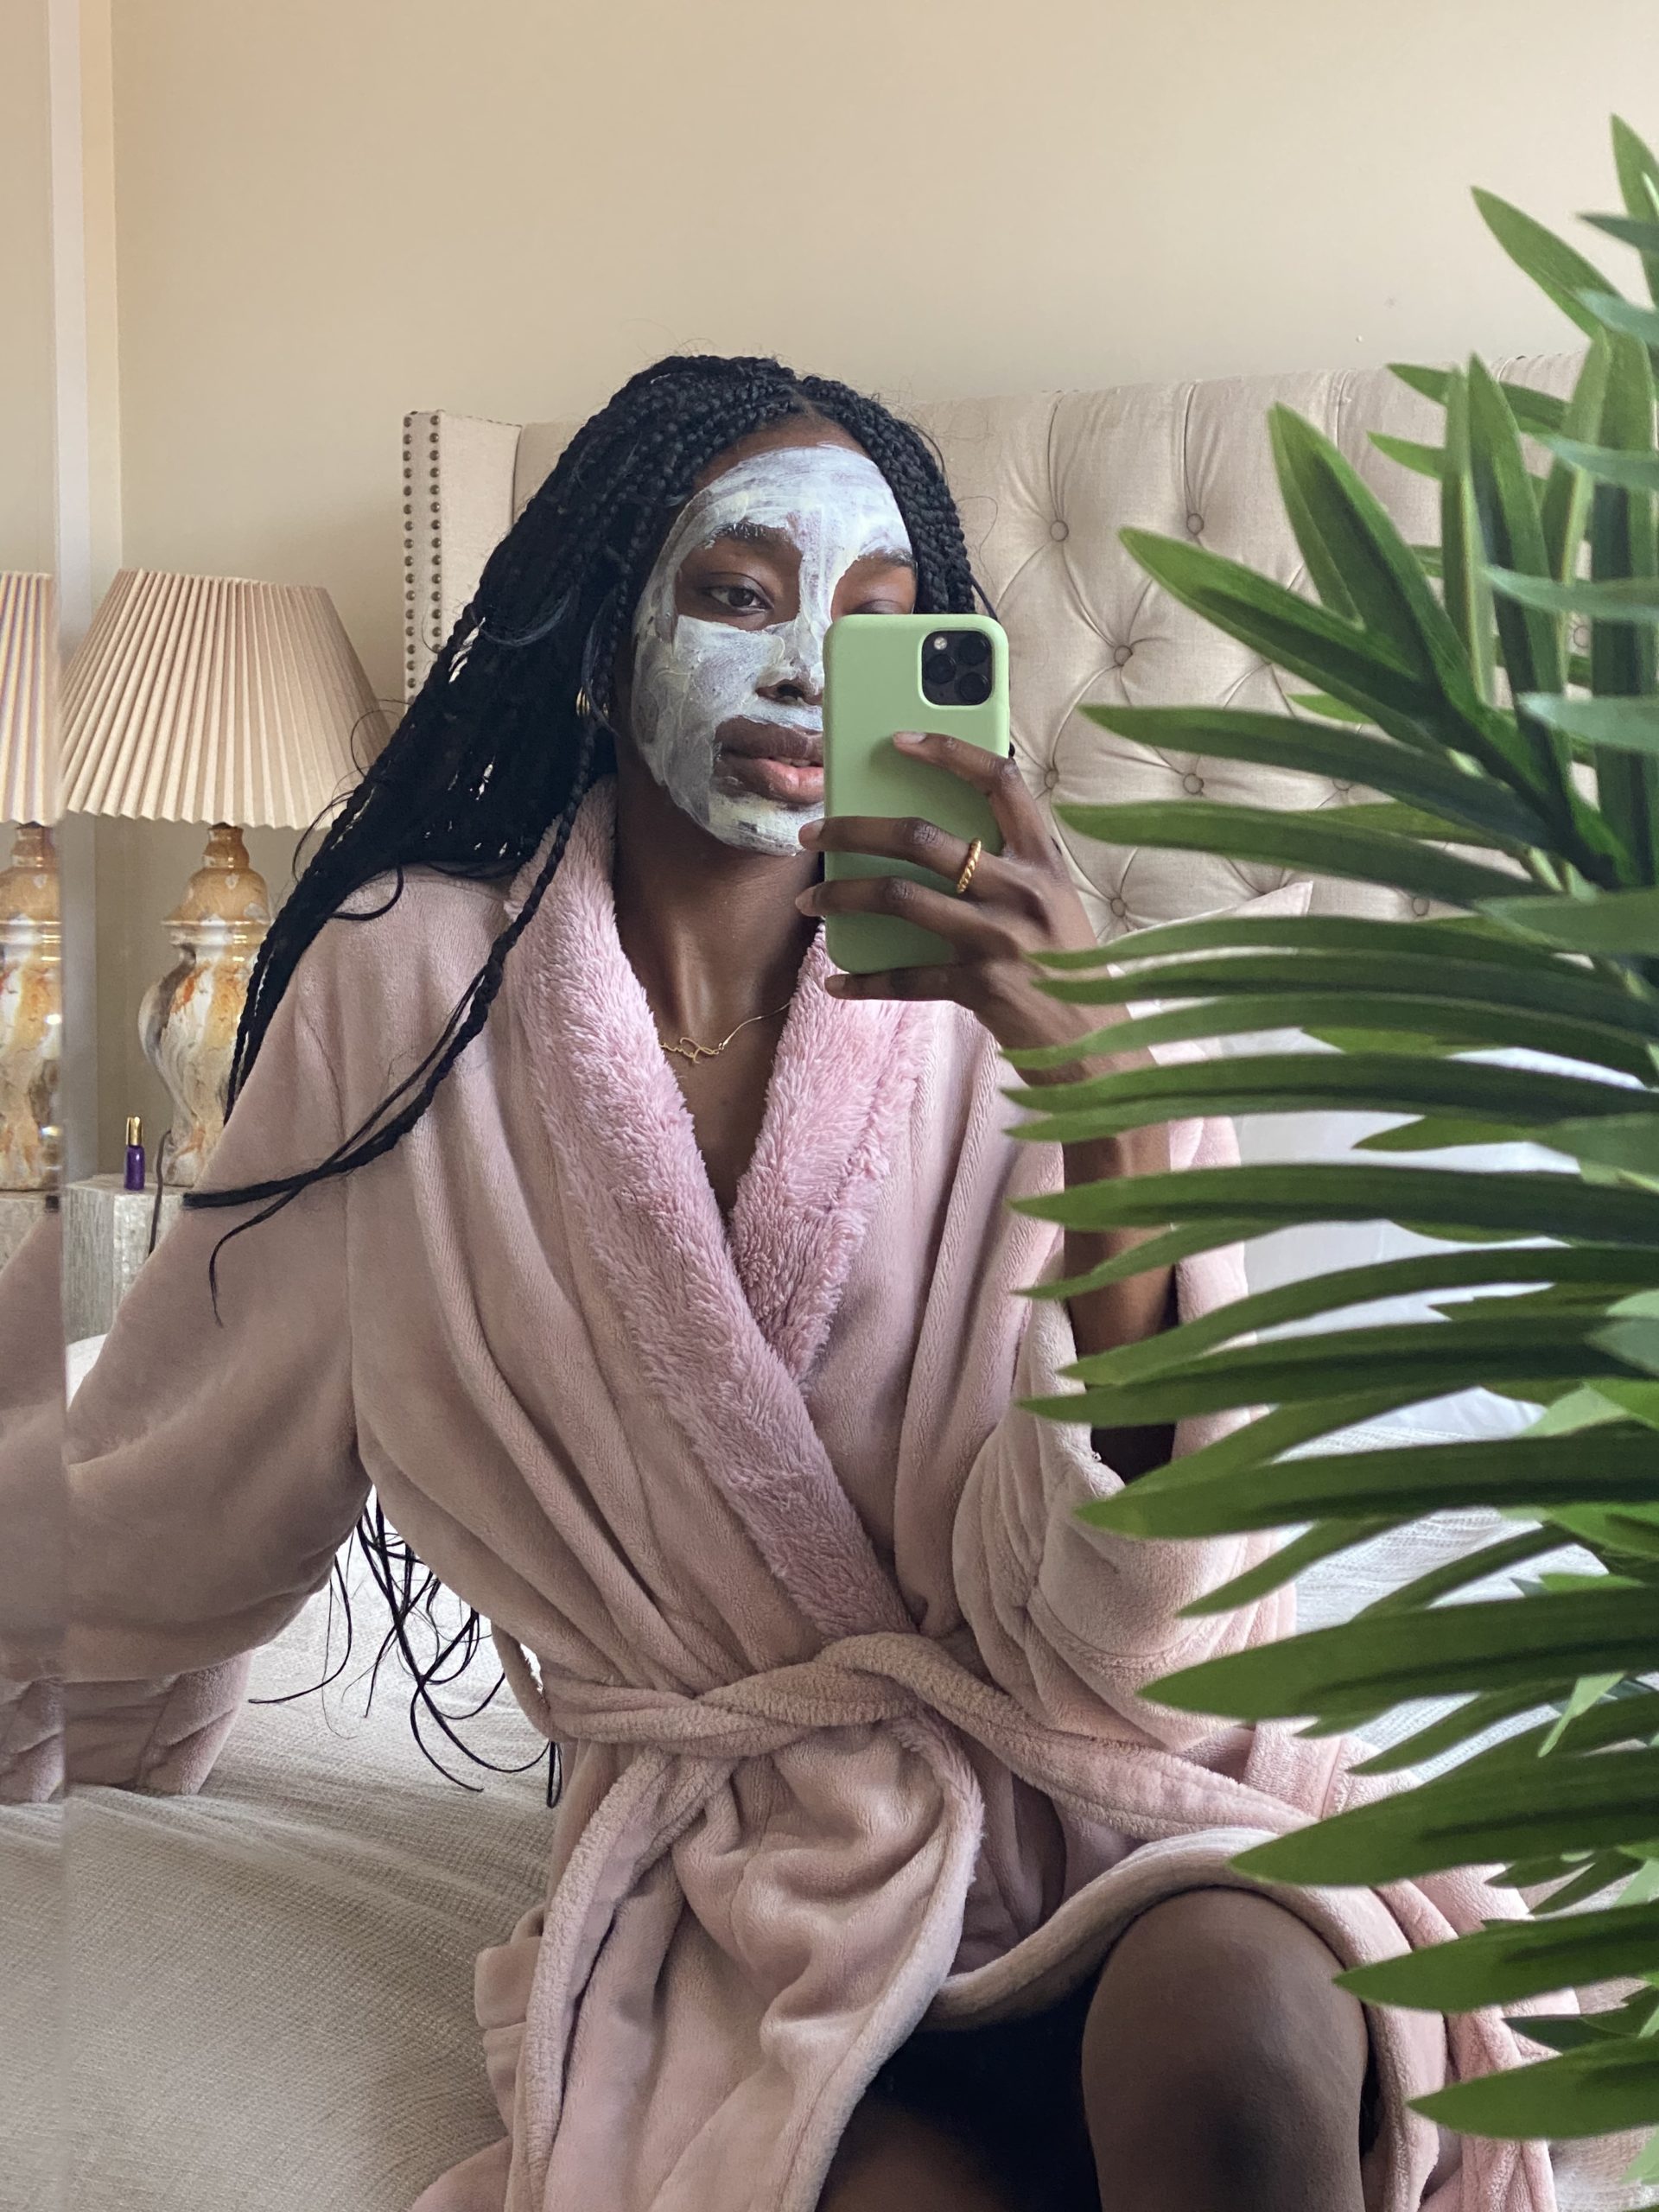 Black woman with white face mask and long braids. She is sitting on a bed in a fluffy pink robe taking a selfie of herself. There is a green plant in the right corner